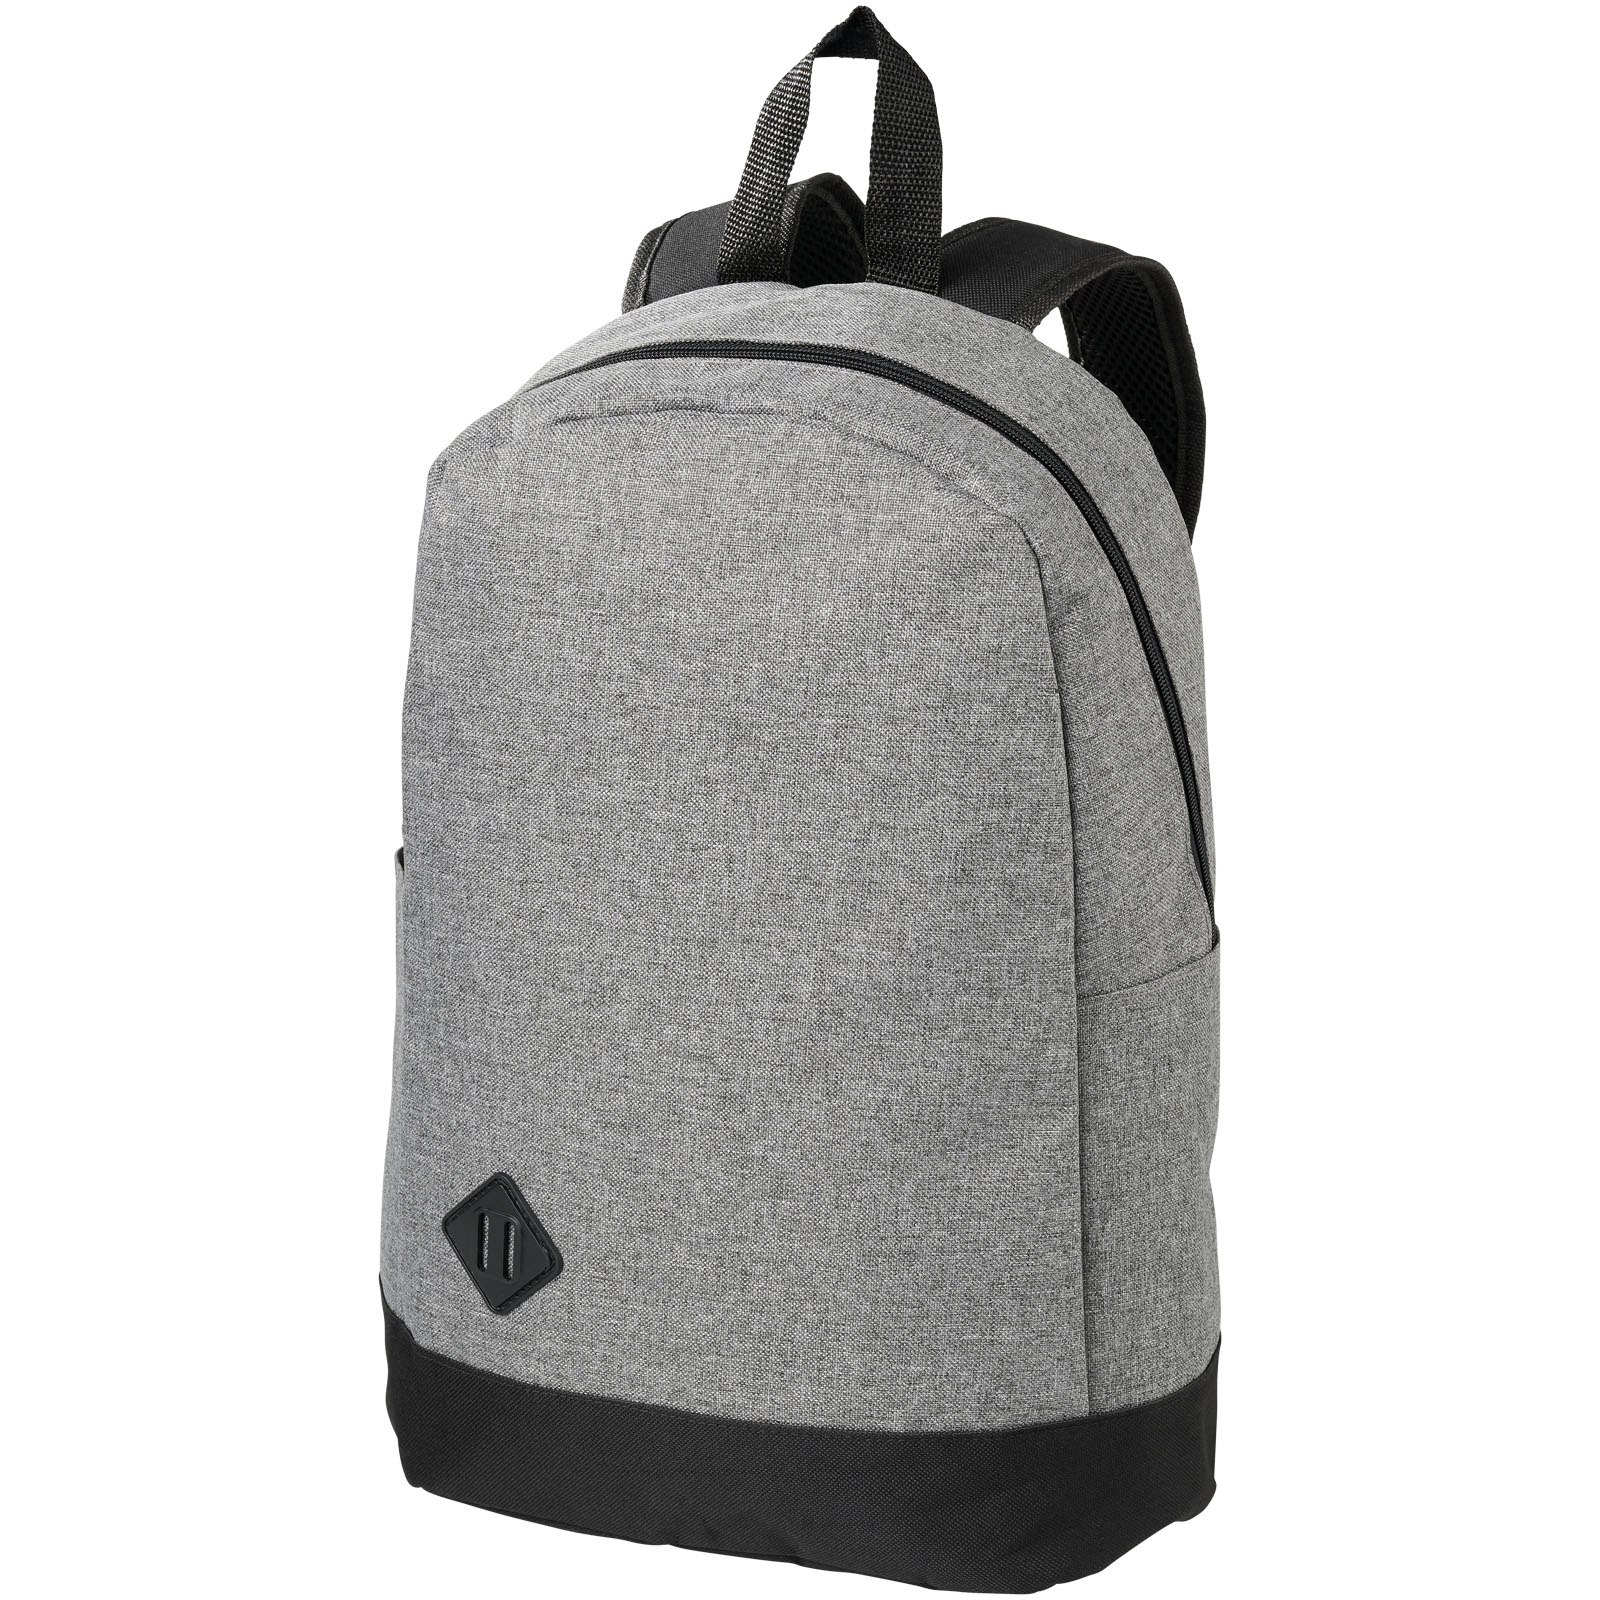 Dome 15 laptop backpack